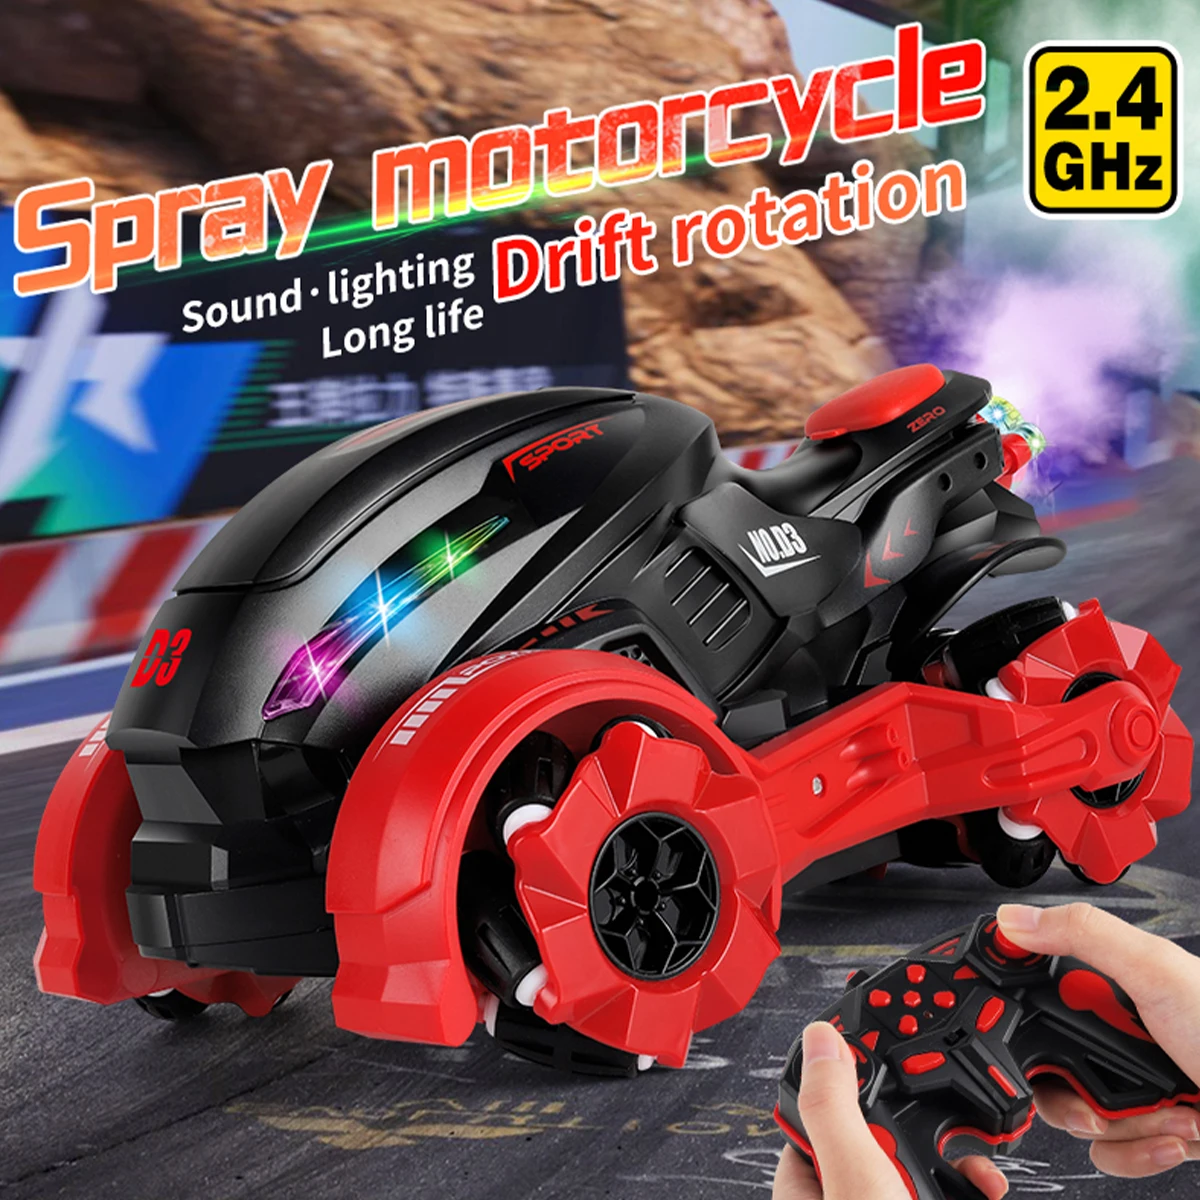 monster truck remote control car Spray RC Motorcycle Drift with Water Mist and Sound Light Effect Jet RC Motorbike Toy 360° Rotation 2.4G RC Drift Racing Motorcy remote control racing car